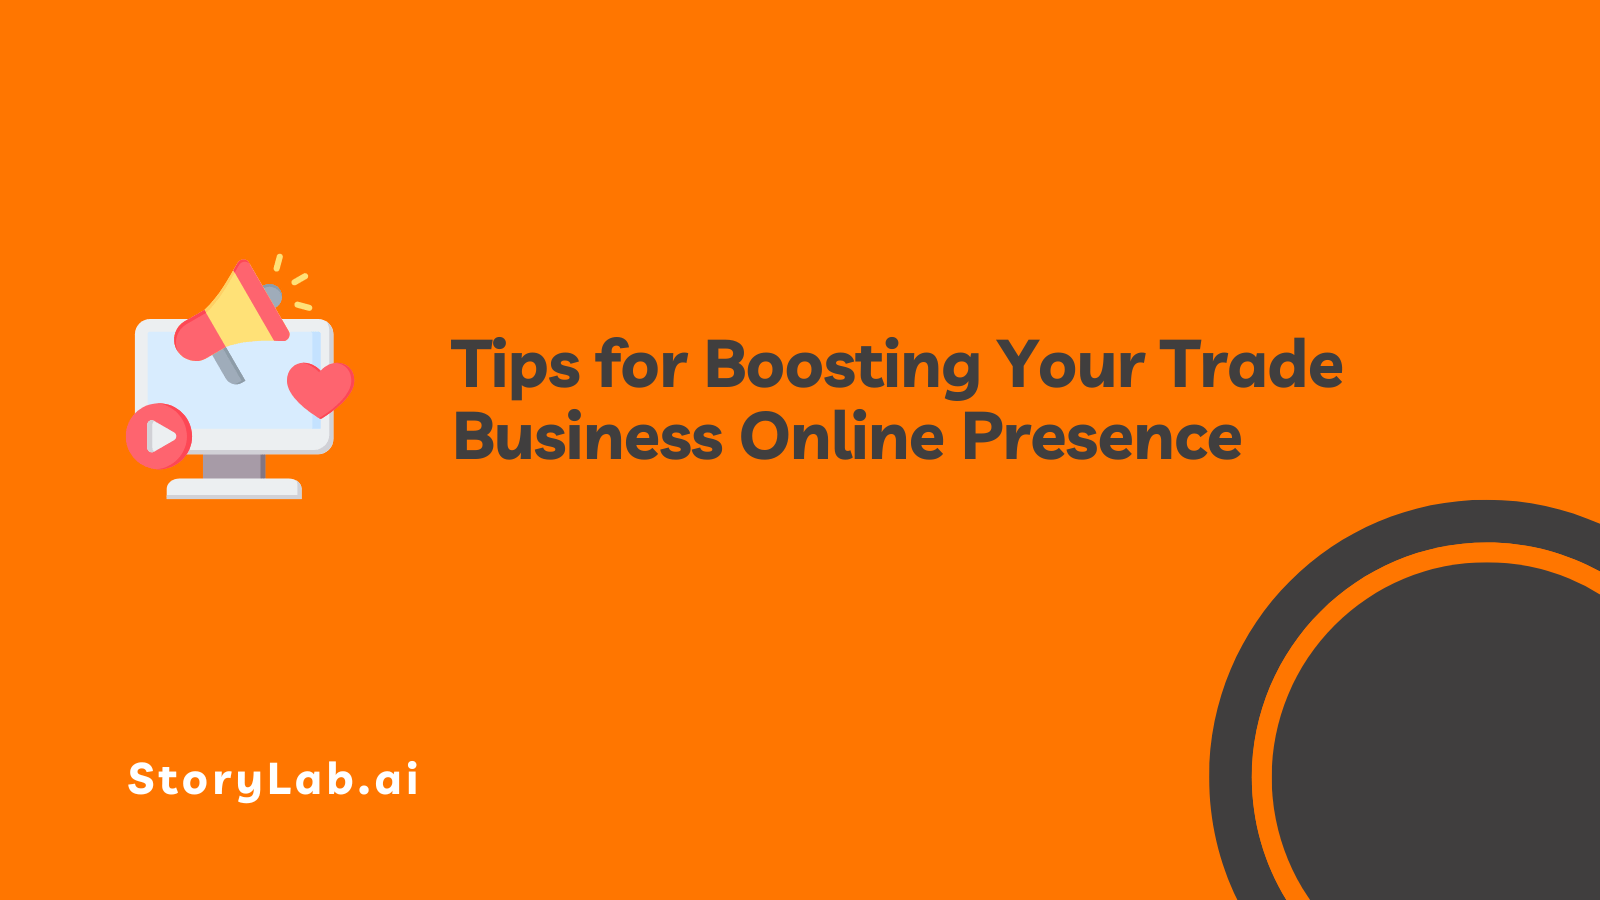 Tips for Boosting Your Trade Business Online Presence